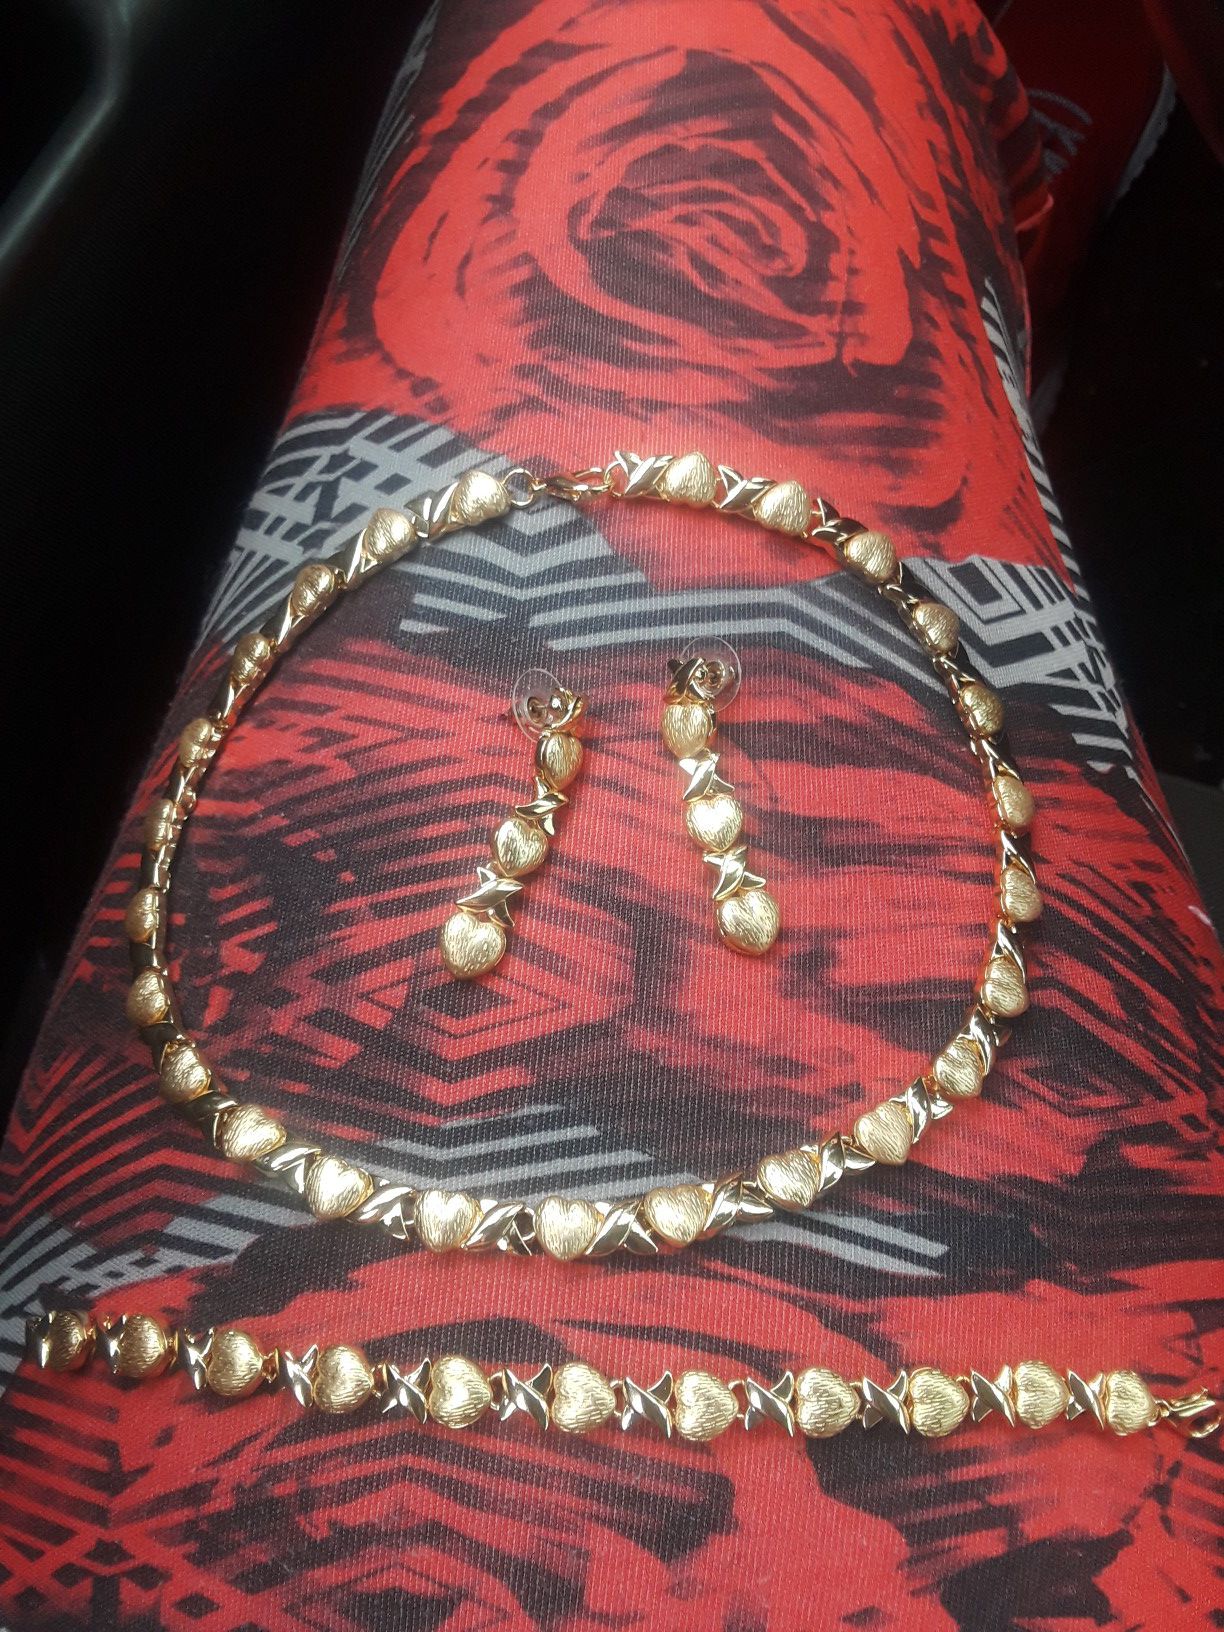 .$60 I DELIVER⚘💎💎⚘14kt Gold plated  necklace with matching earrings and bracelet will not fade or tarnish